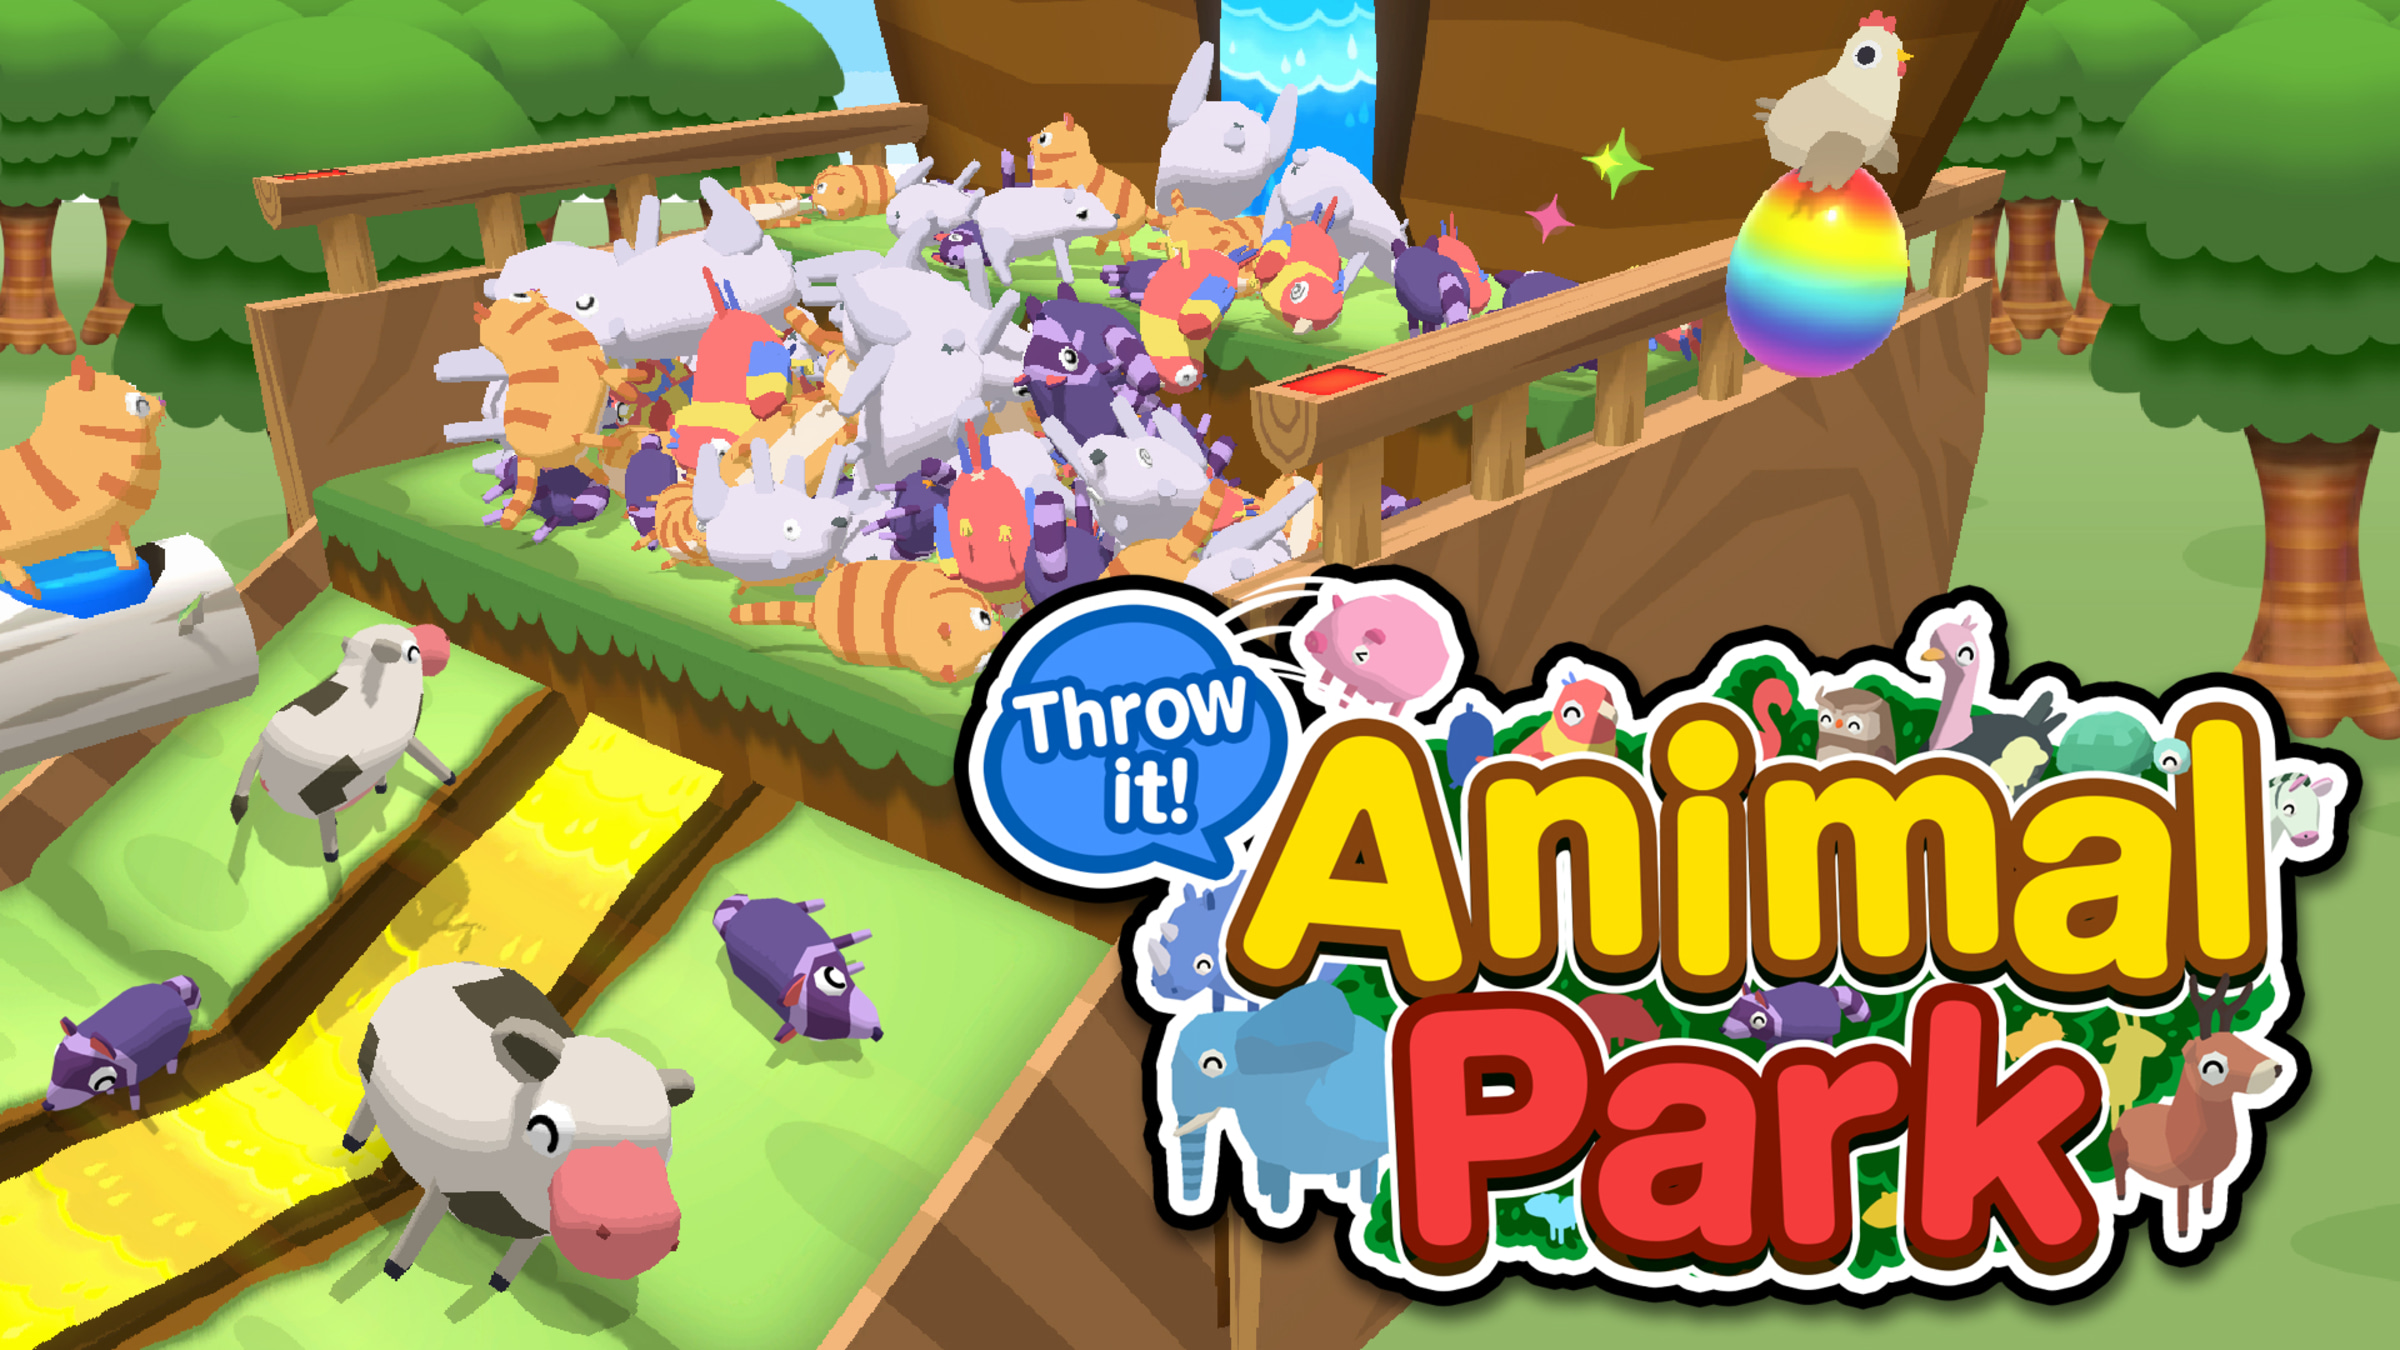 Throw it! Animal Park for Nintendo Switch - Nintendo Official Site